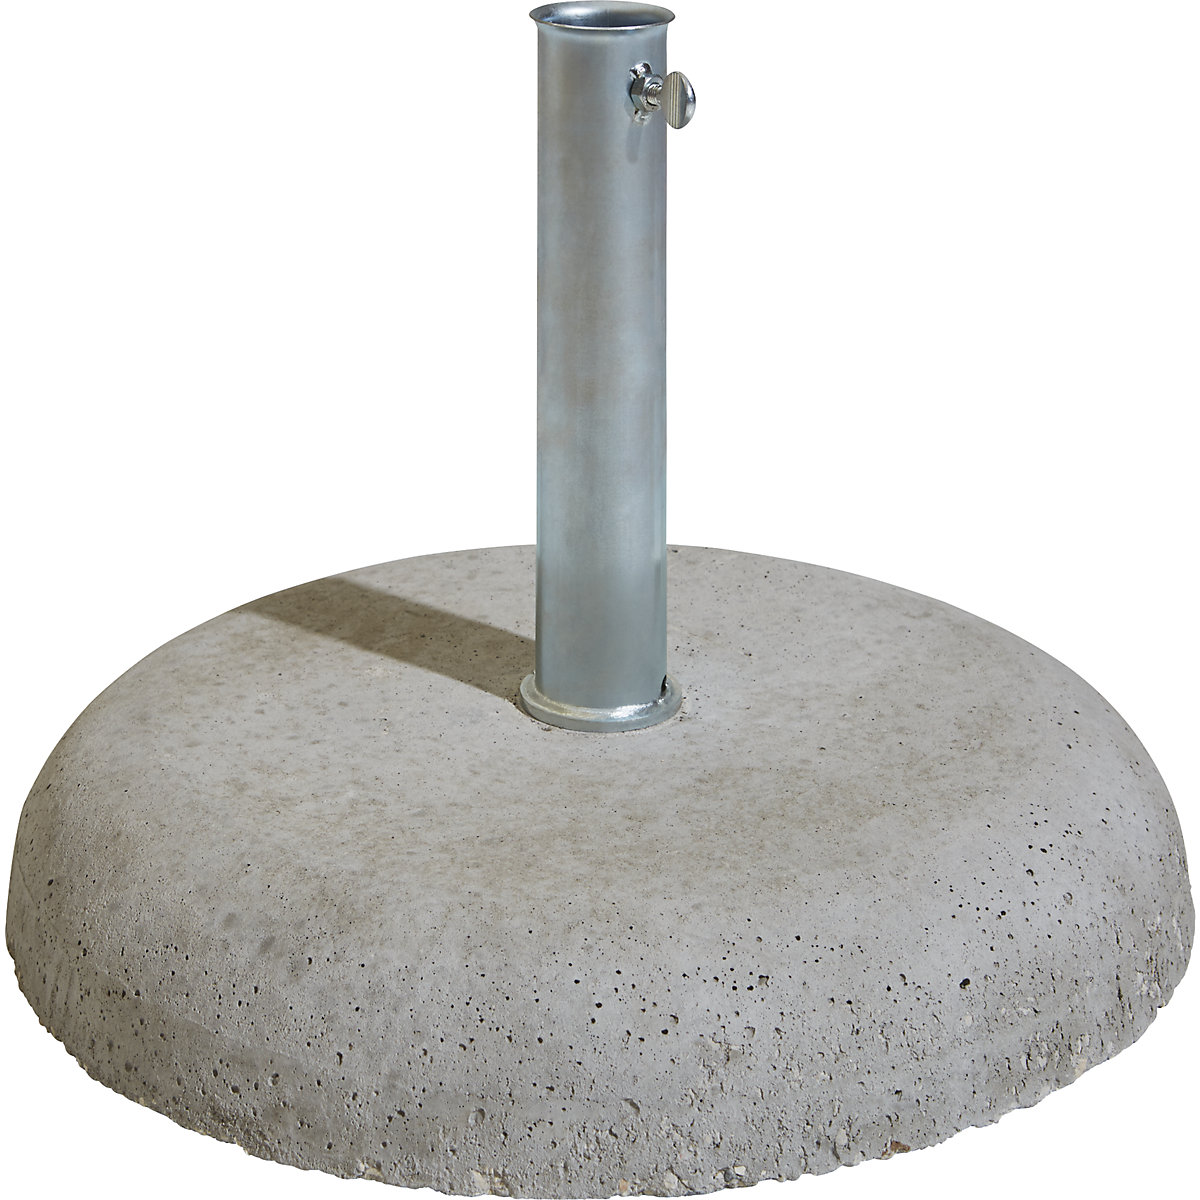 Parasol base, round, made of natural concrete, for pole Ø up to 58 mm